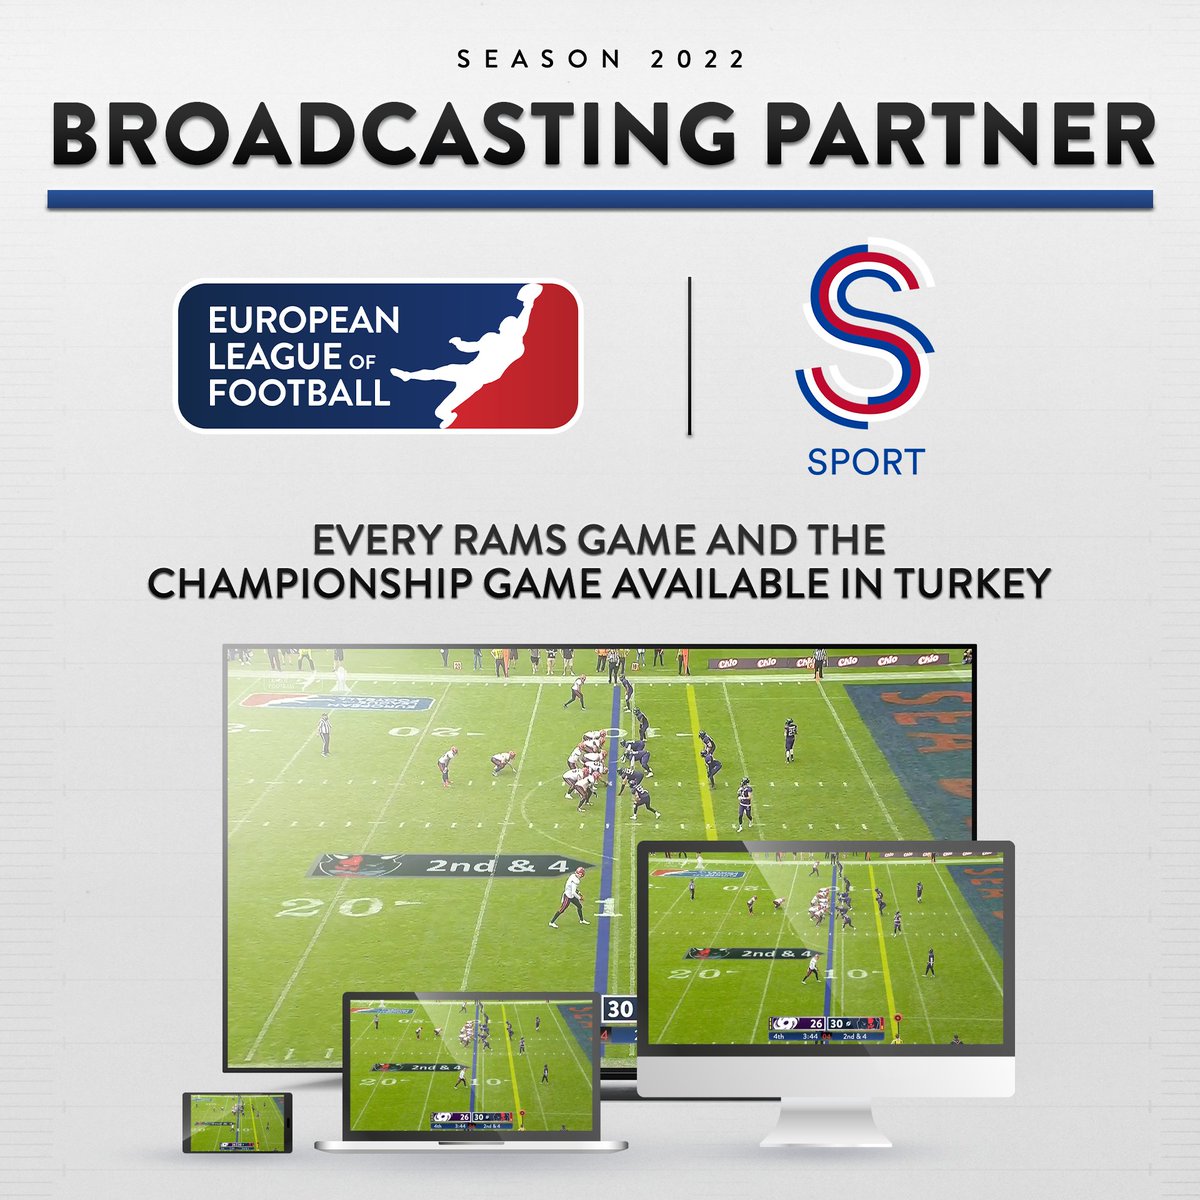 Saran Media will broadcast the Istanbul Rams and the Championship Game with  S Sport